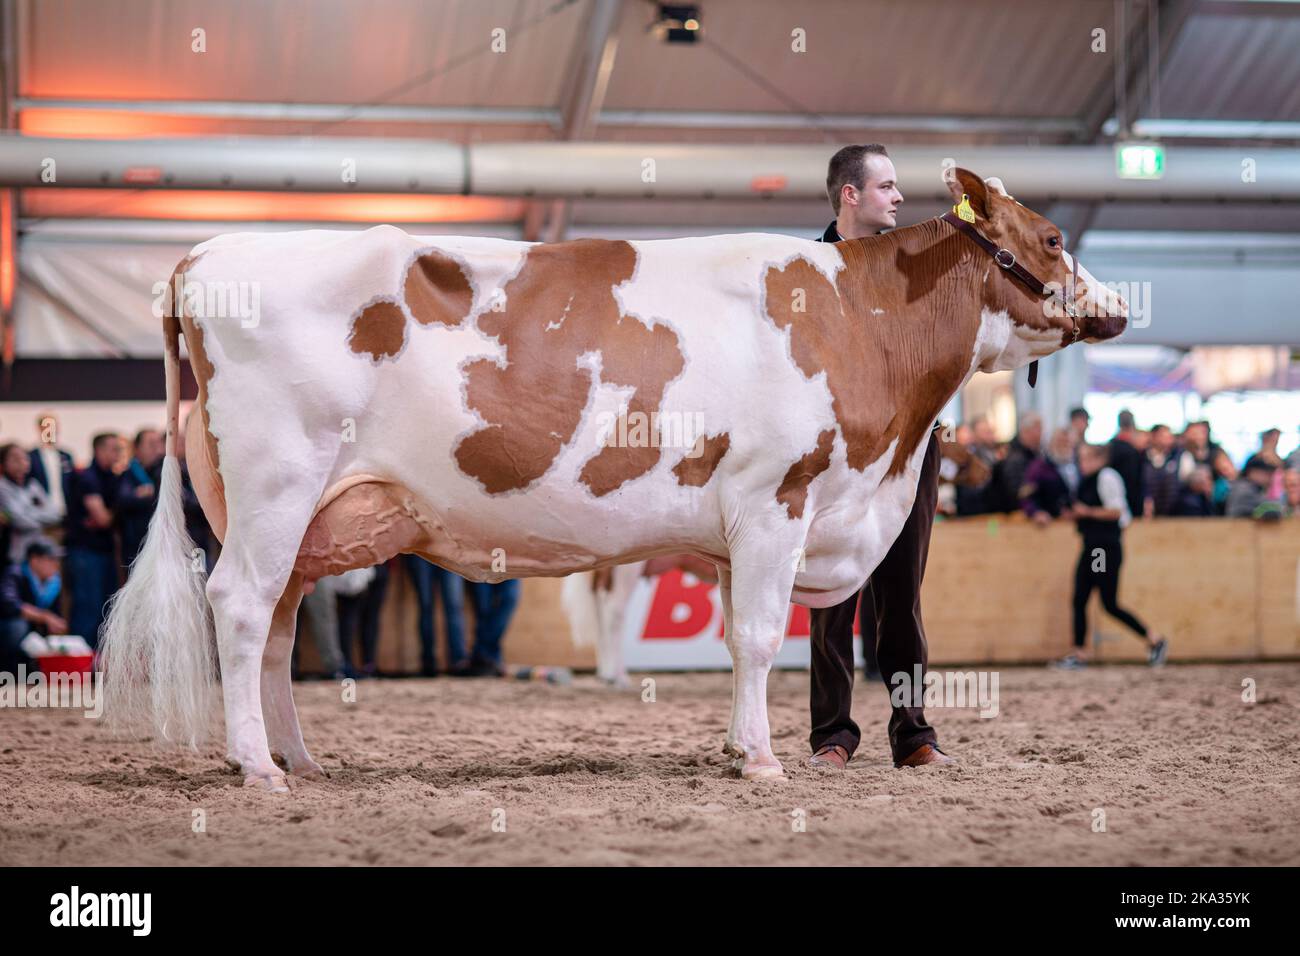 An Ayrshire cattle offered for visitors during BEA exhibition in Bern, Switzerland Stock Photo